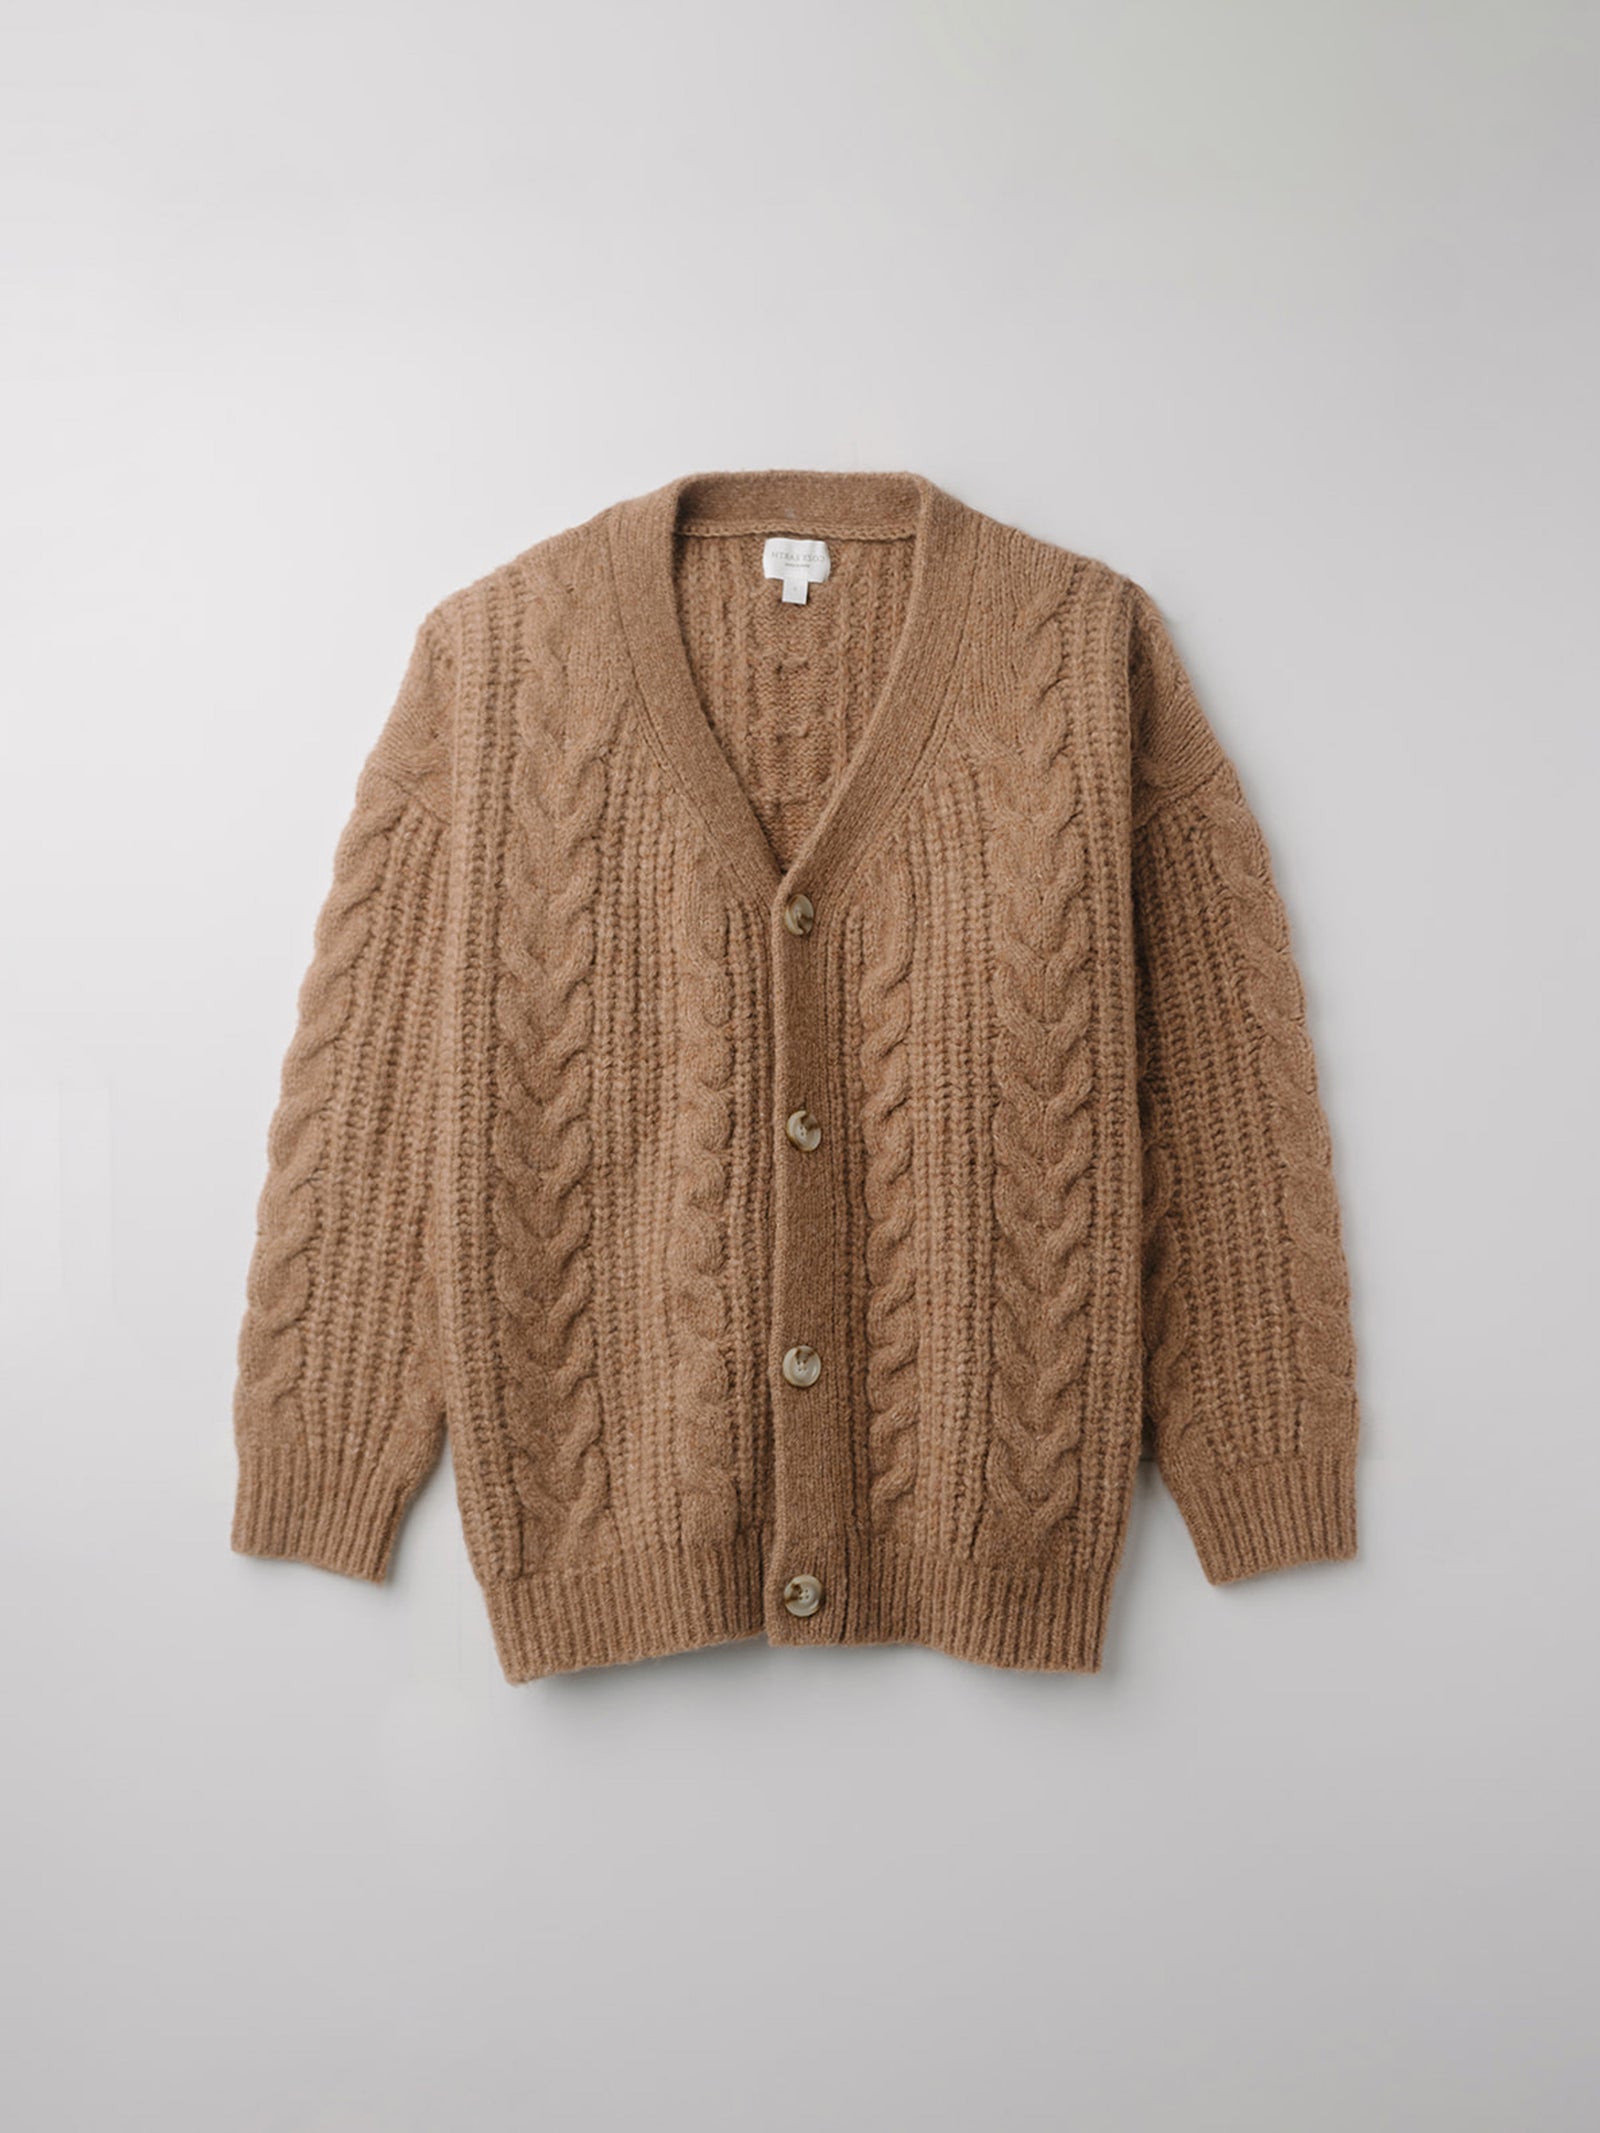 Flay lay of camel cable knit cardigan with white background 